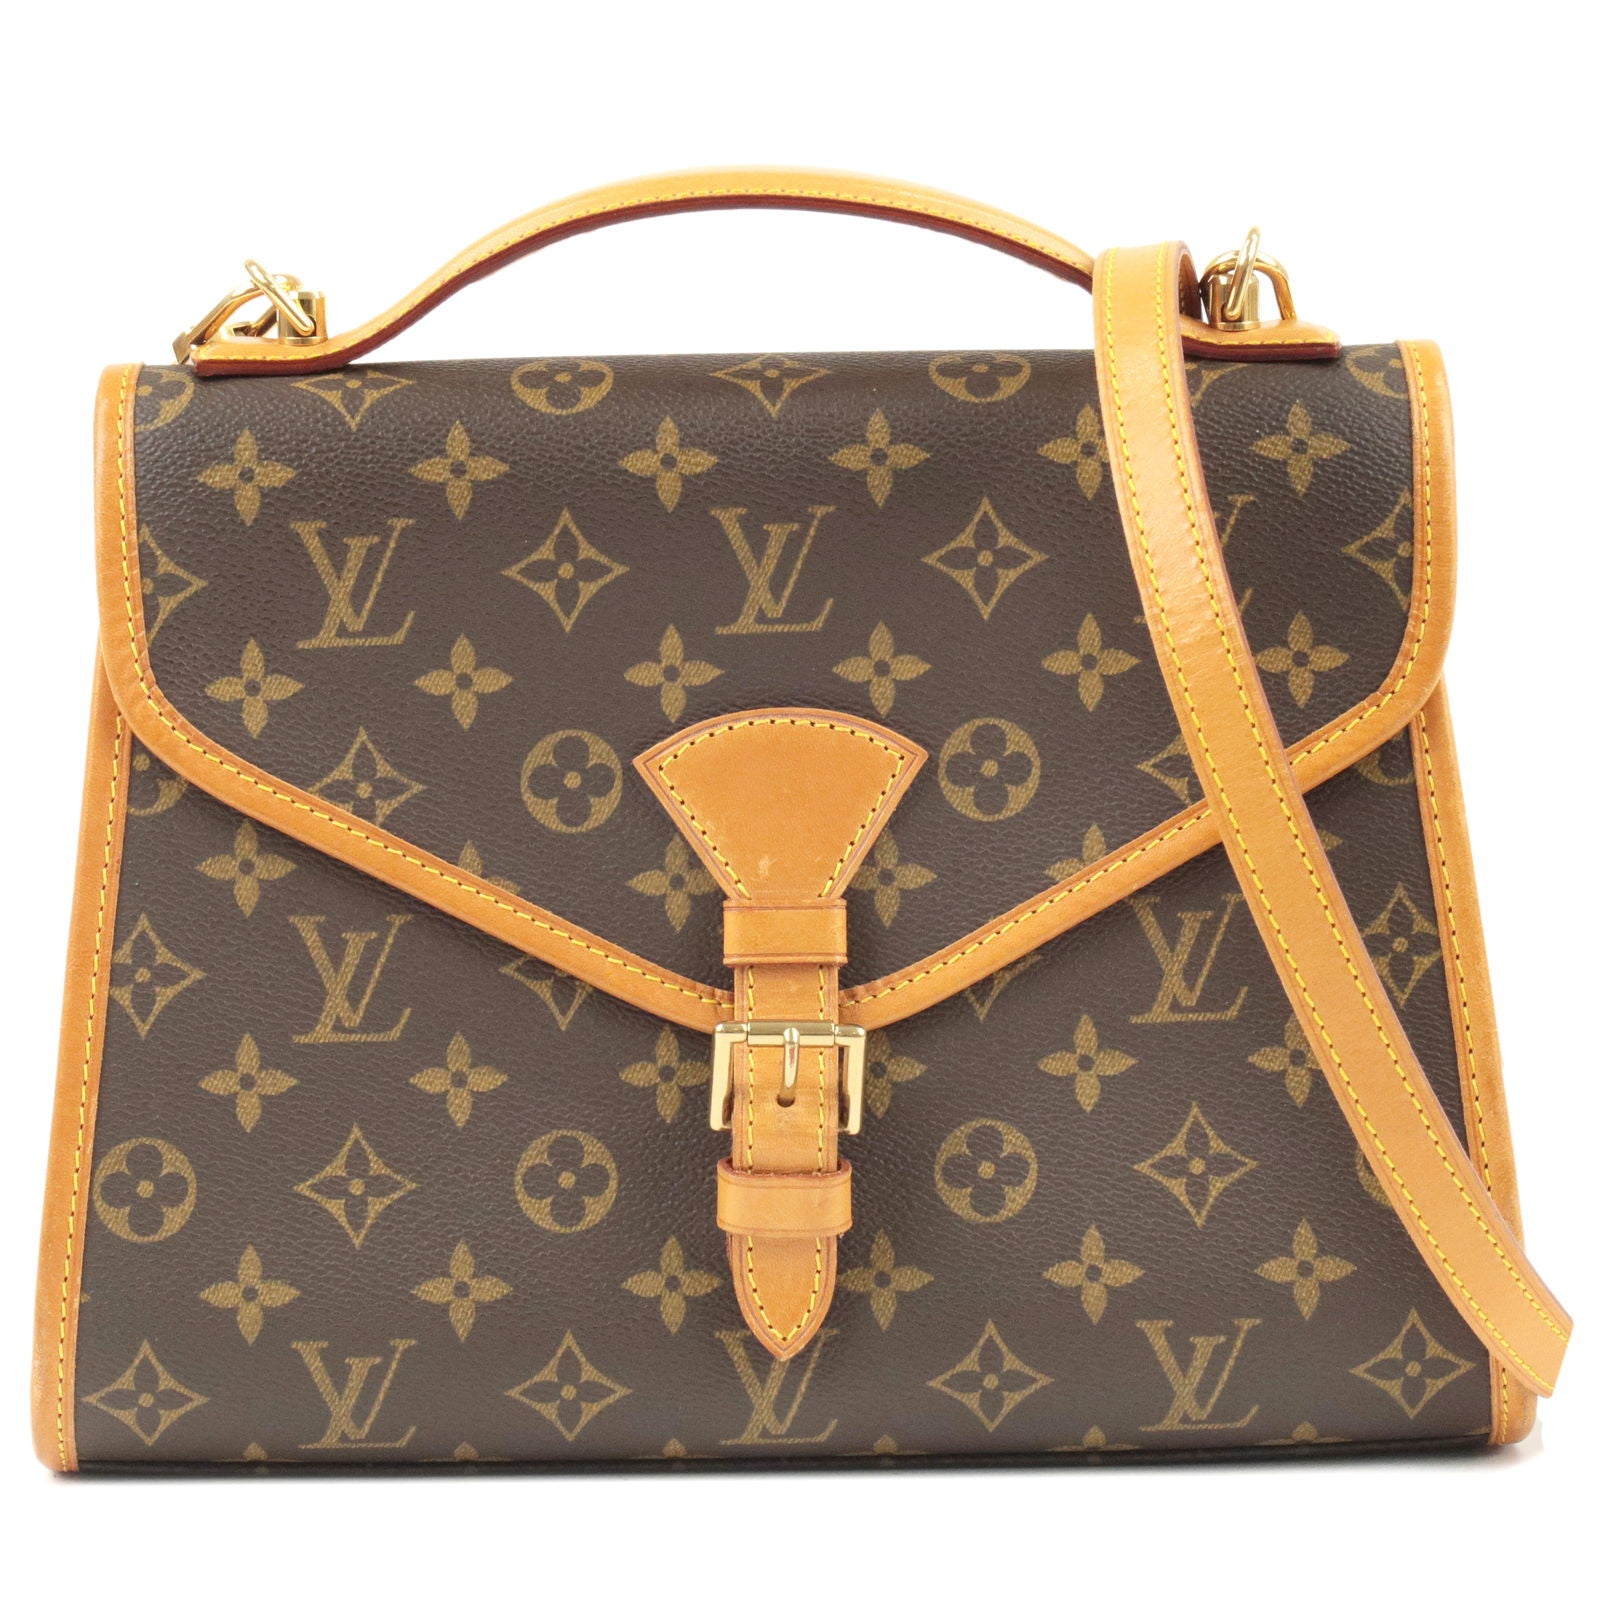 Bag and Purse Organizer with Regular Style for Louis Vuitton Metis